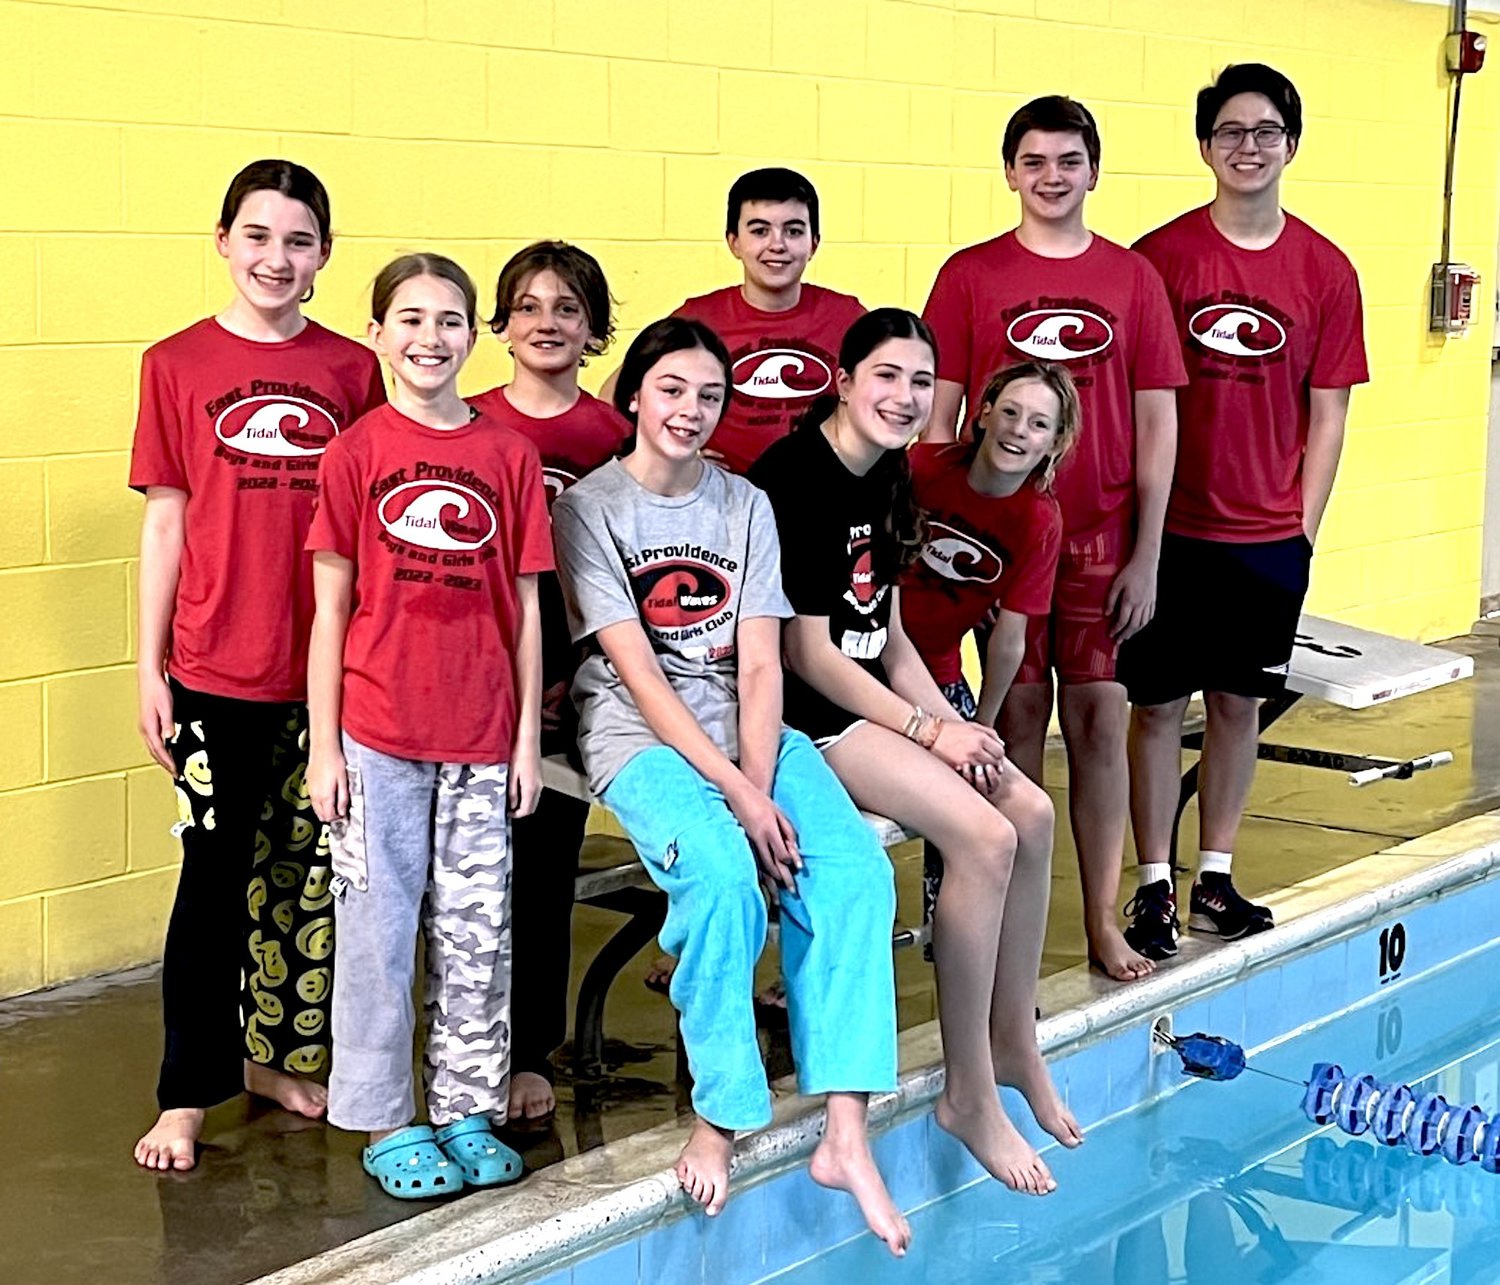 Members of the Boys & Girls Club of East Providence’s “Tidal Waves” youth swim squad heading to nationals next week include (front row, left to right) Ambri Fonseca, Helen Messitt, Laina Fonseca and Isabel McKinney; (back row) Kaylee Collins, Weston David, Luke DeMoura, Lucas Zonfrillo and Nick Capobianco.